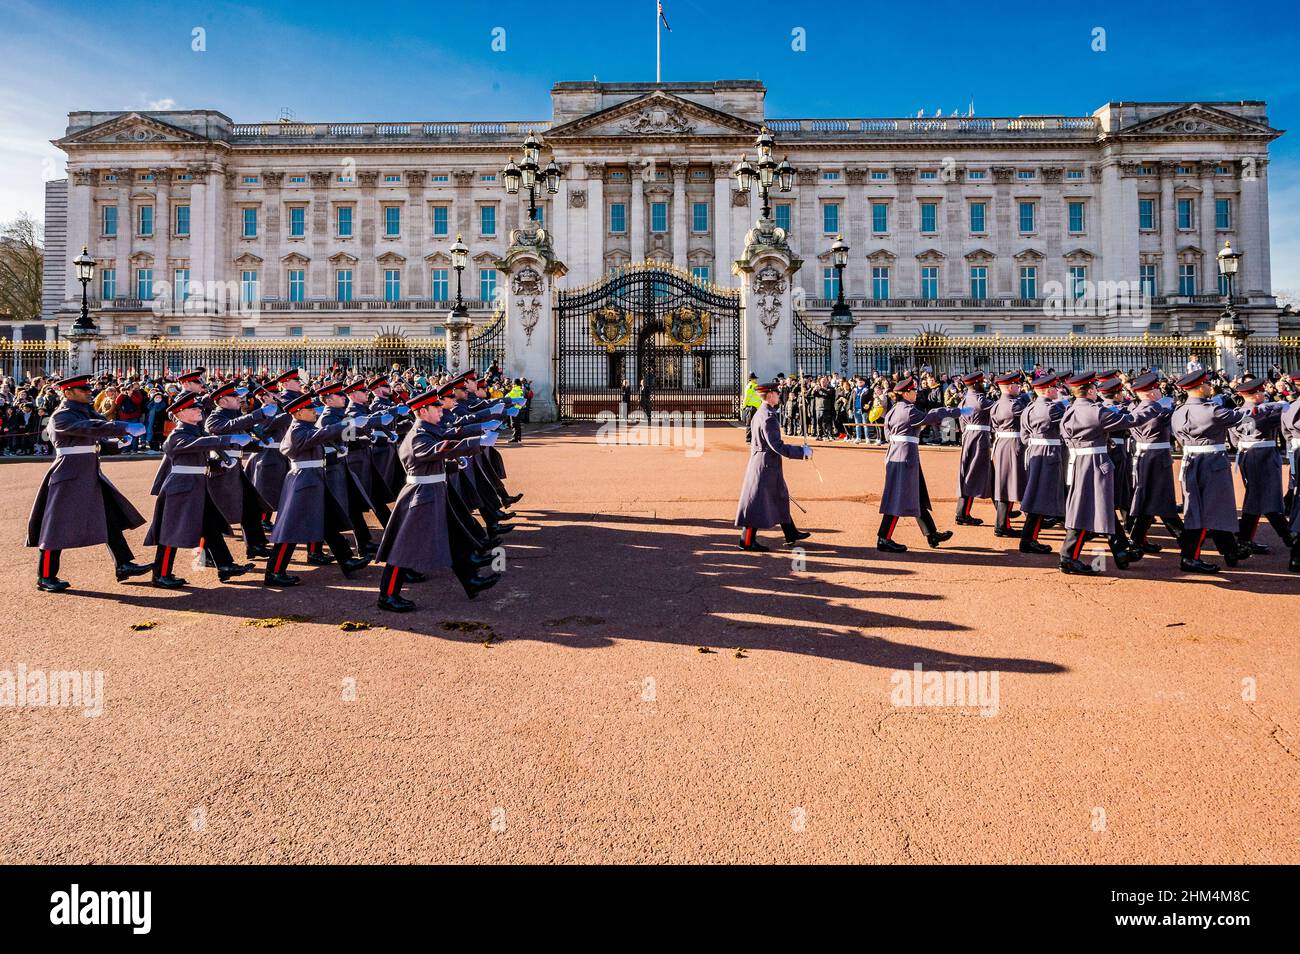 London, UK. 7th Feb, 2022. The Yorkshire Gunners (5th Regiment, The Royal Regiment of Artillery) undertake Public Duties in London and Windsor including changing the guard at Buckingham Palace - on the 70th anniversary of HM The Queen's Accession to the Throne and the start of the Platinum Jubilee. Credit: Guy Bell/Alamy Live News Stock Photo